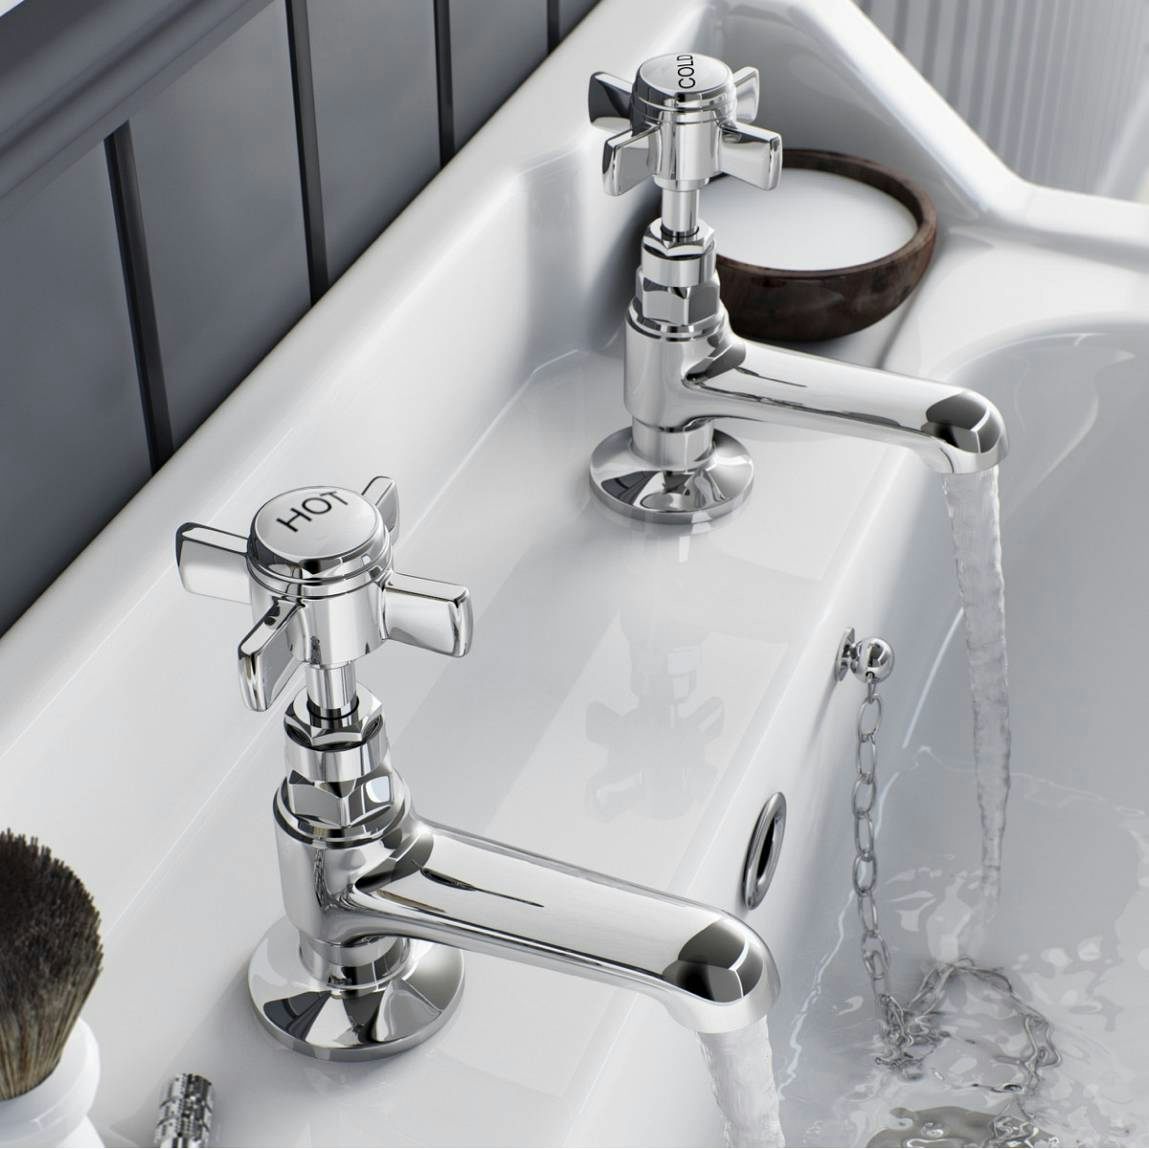 Traditional hot and cold pillar taps